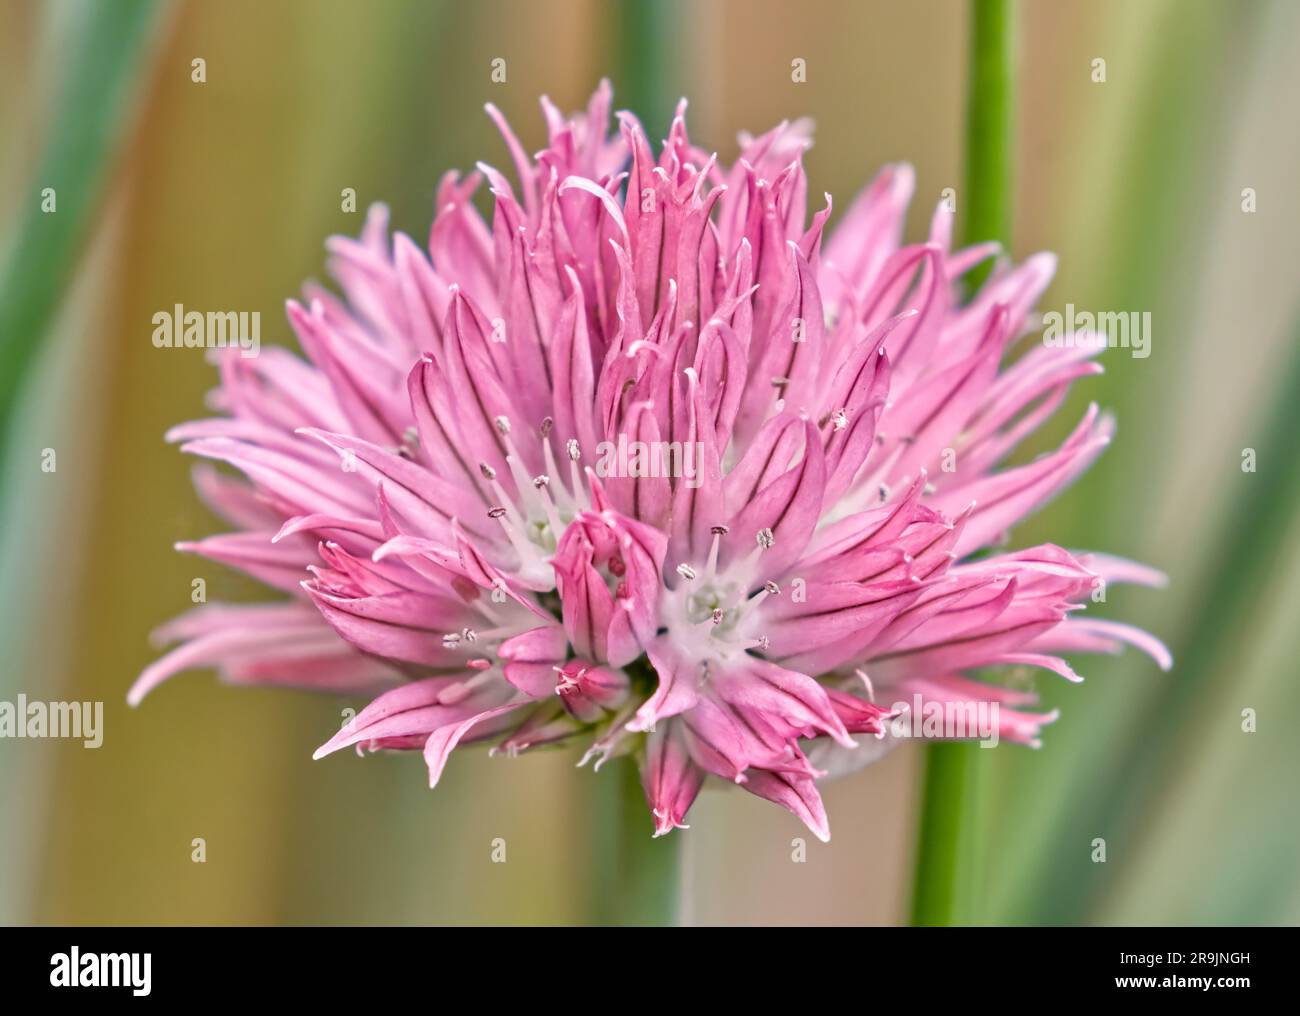 Chive flower Stock Photo